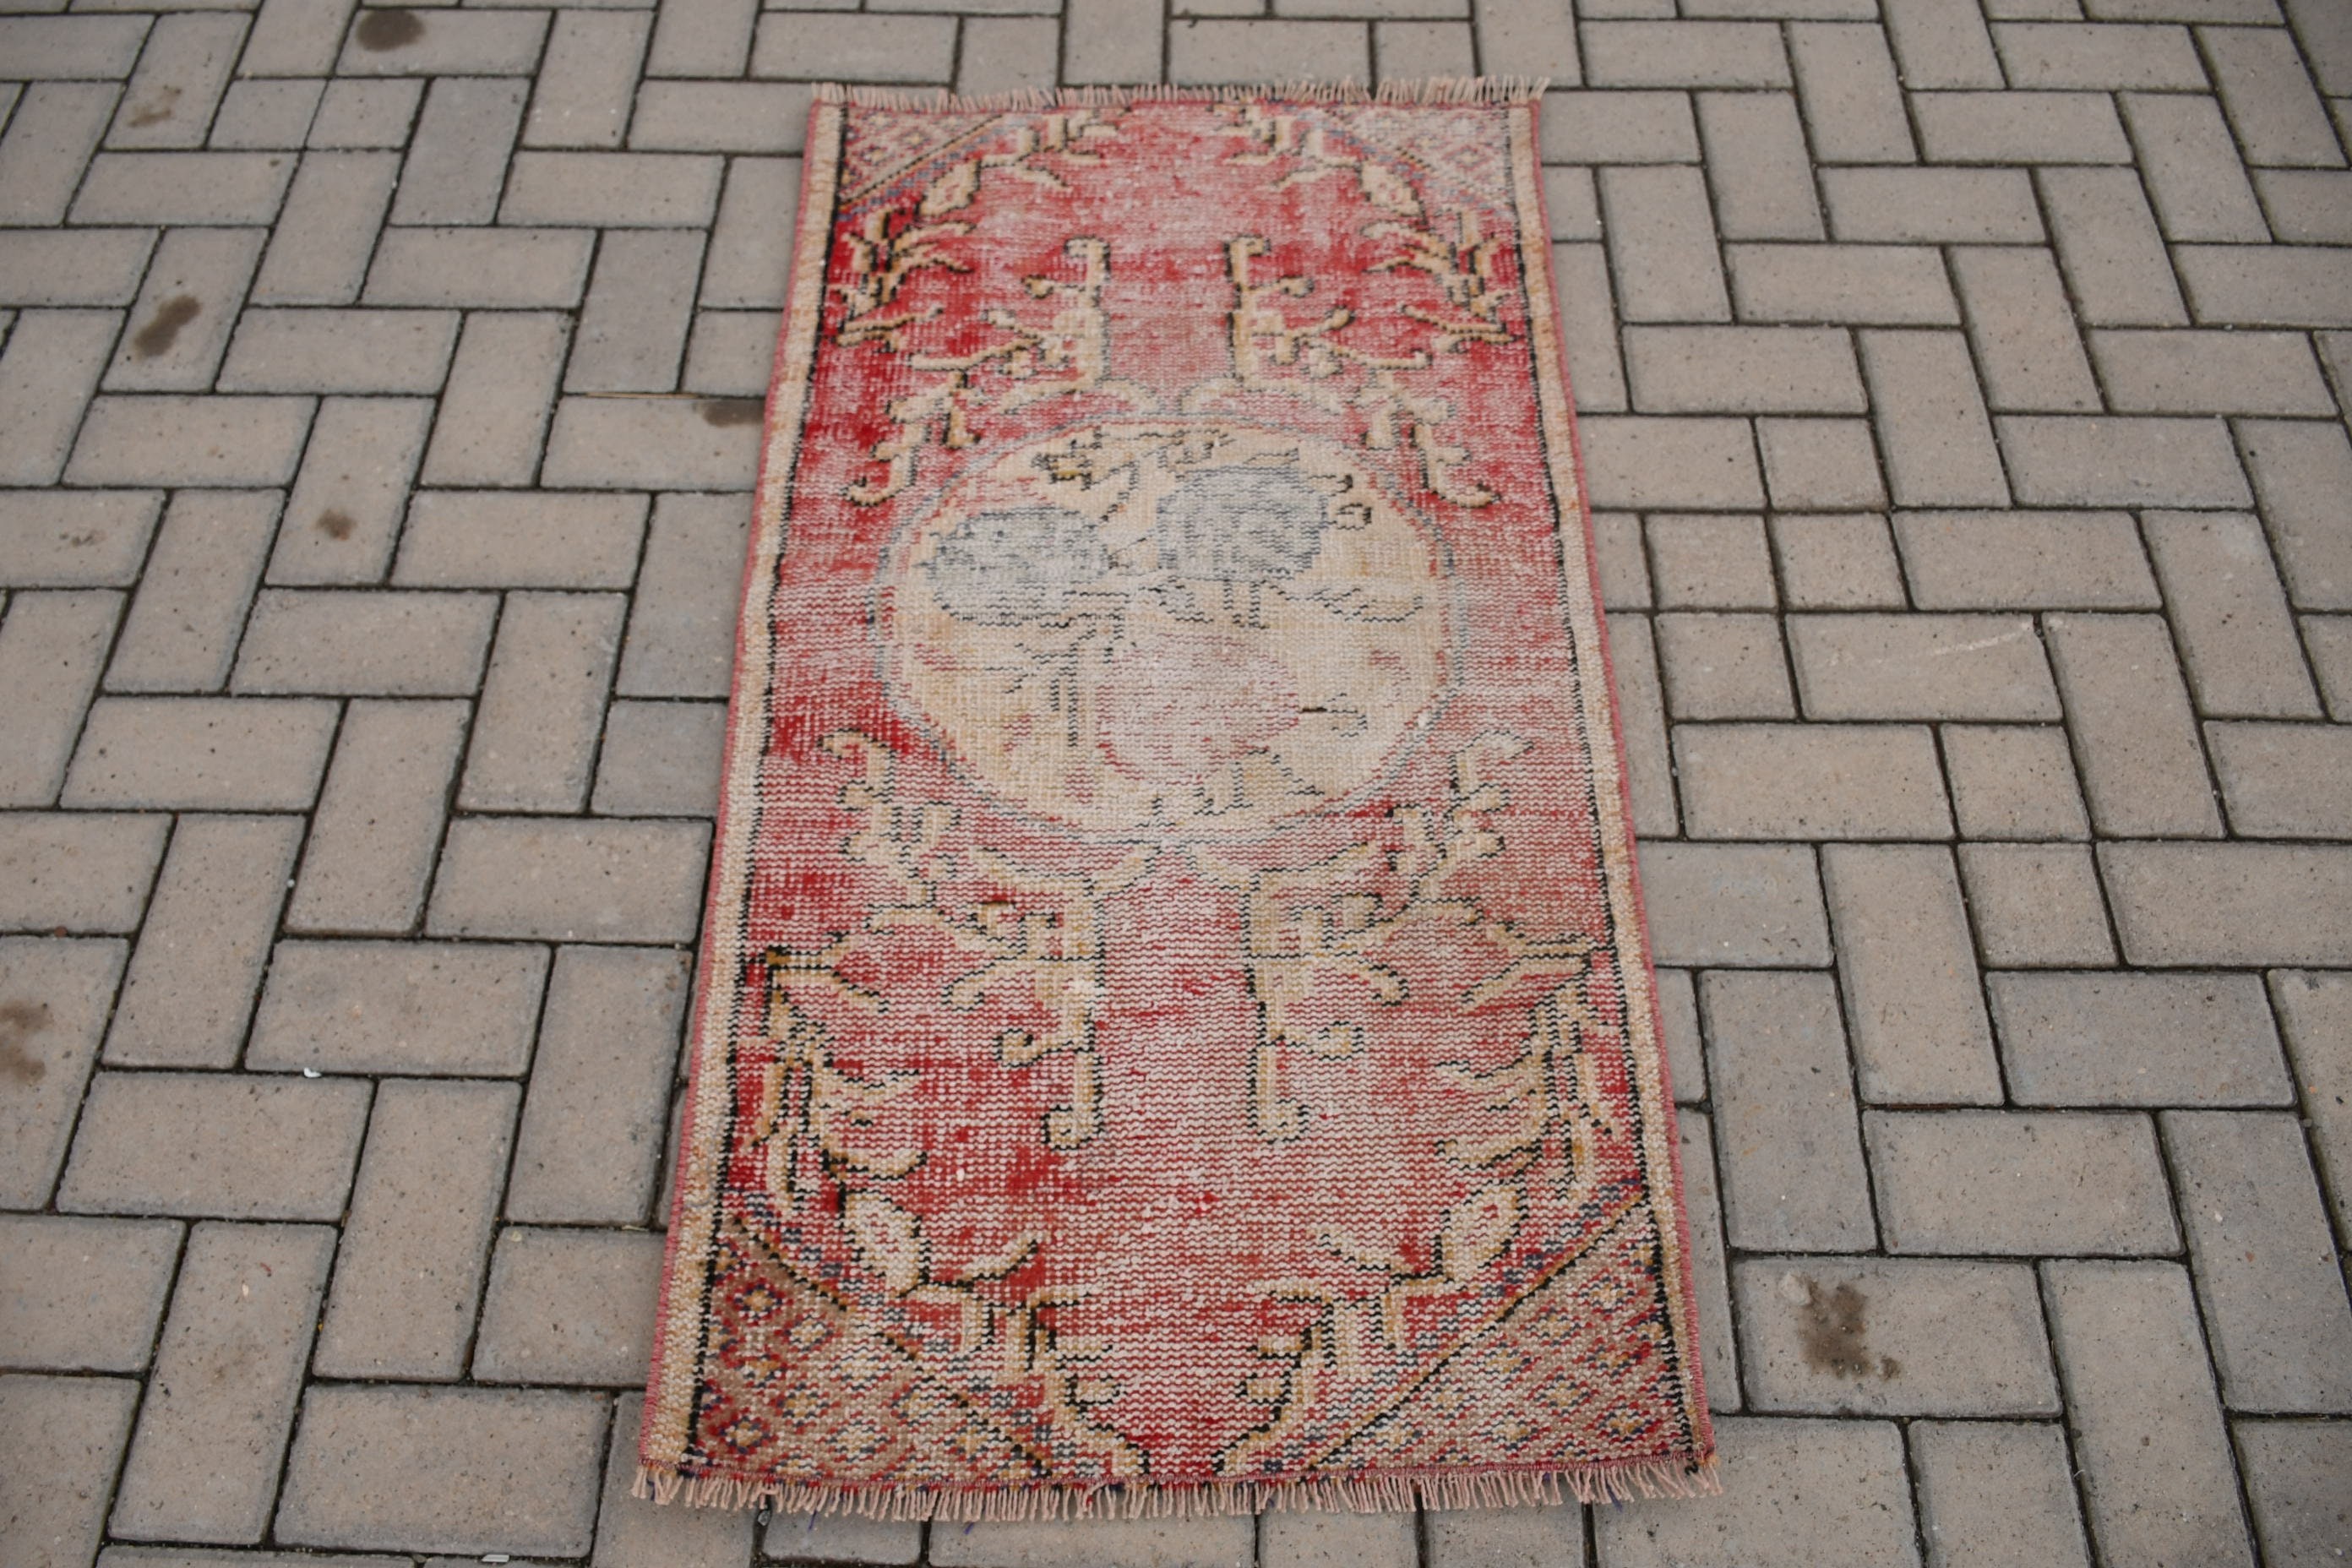 Turkish Rug, 2.2x4 ft Small Rug, Home Decor Rug, Red Antique Rugs, Entry Rugs, Aztec Rug, Rugs for Bedroom, Vintage Rug, Kitchen Rugs